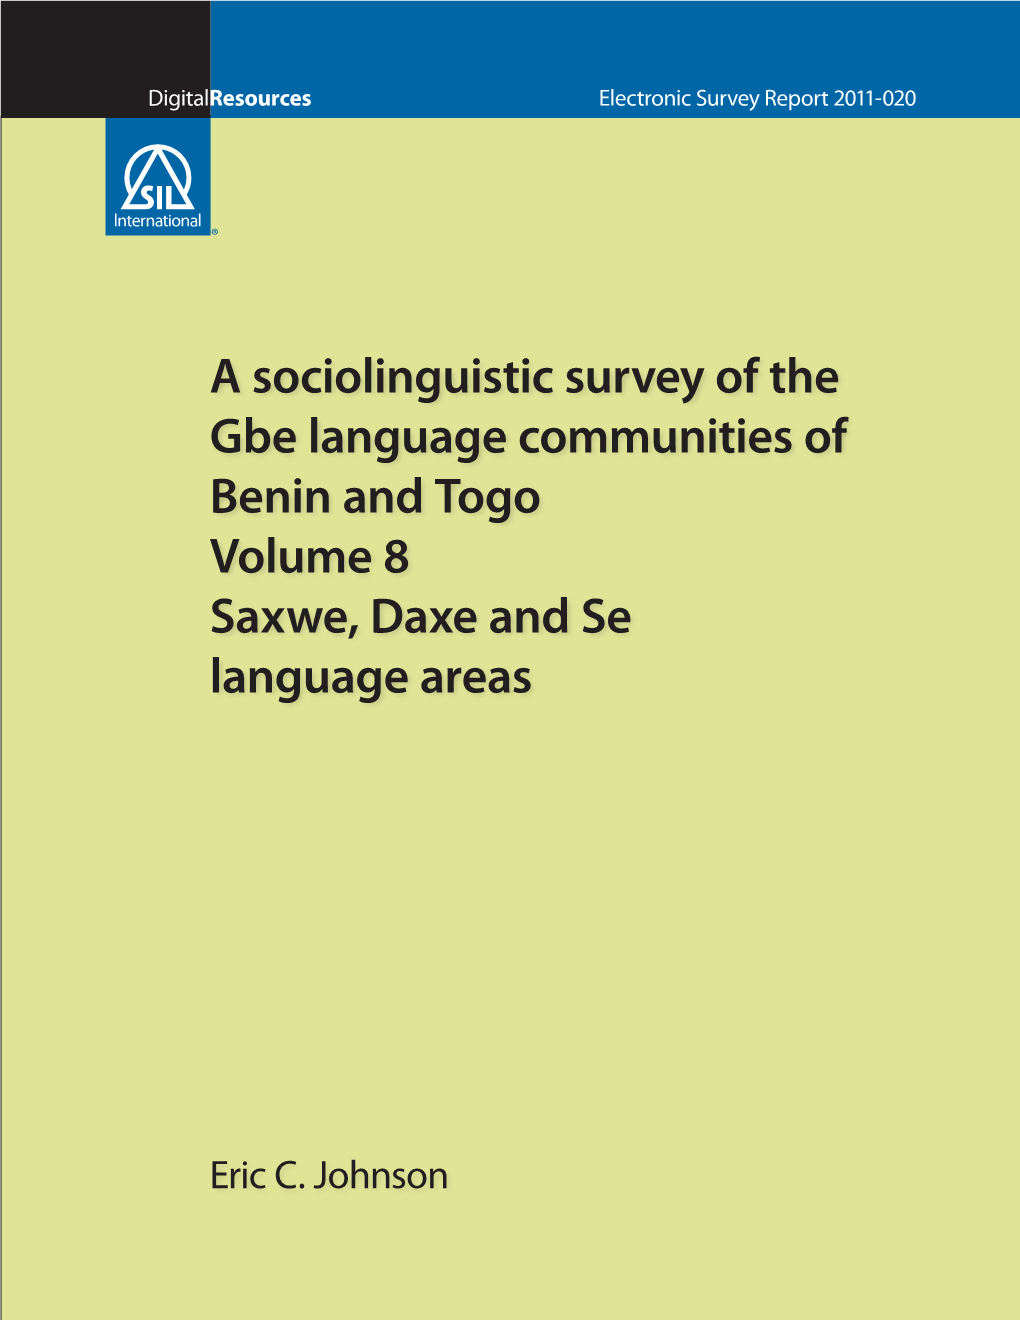 A Sociolinguistic Survey of the Gbe Language Communities of Benin and Togo Volume 8 Saxwe, Daxe and Se Language Areas